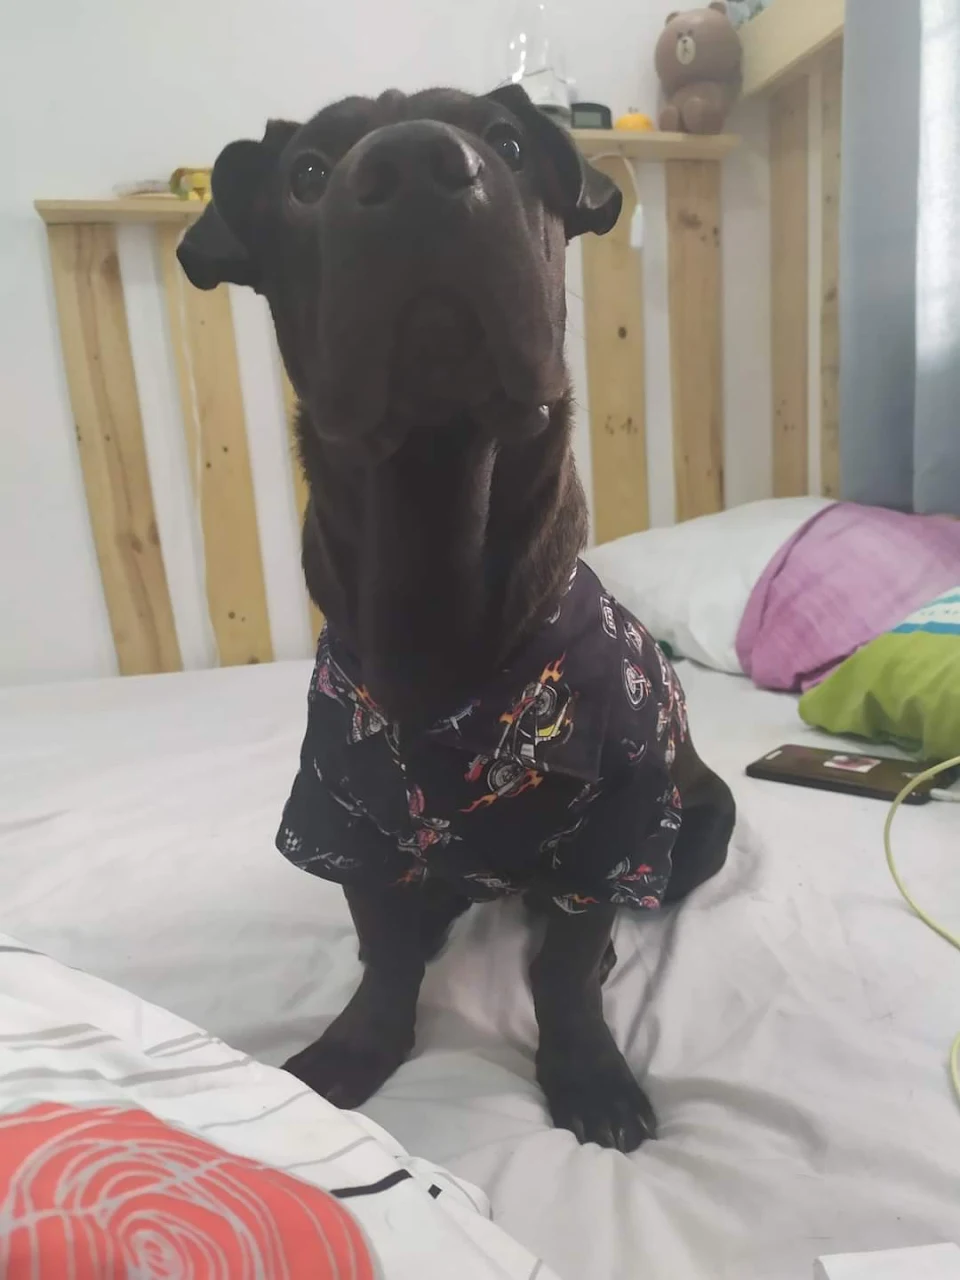 Midnight would like to show off his ootd.